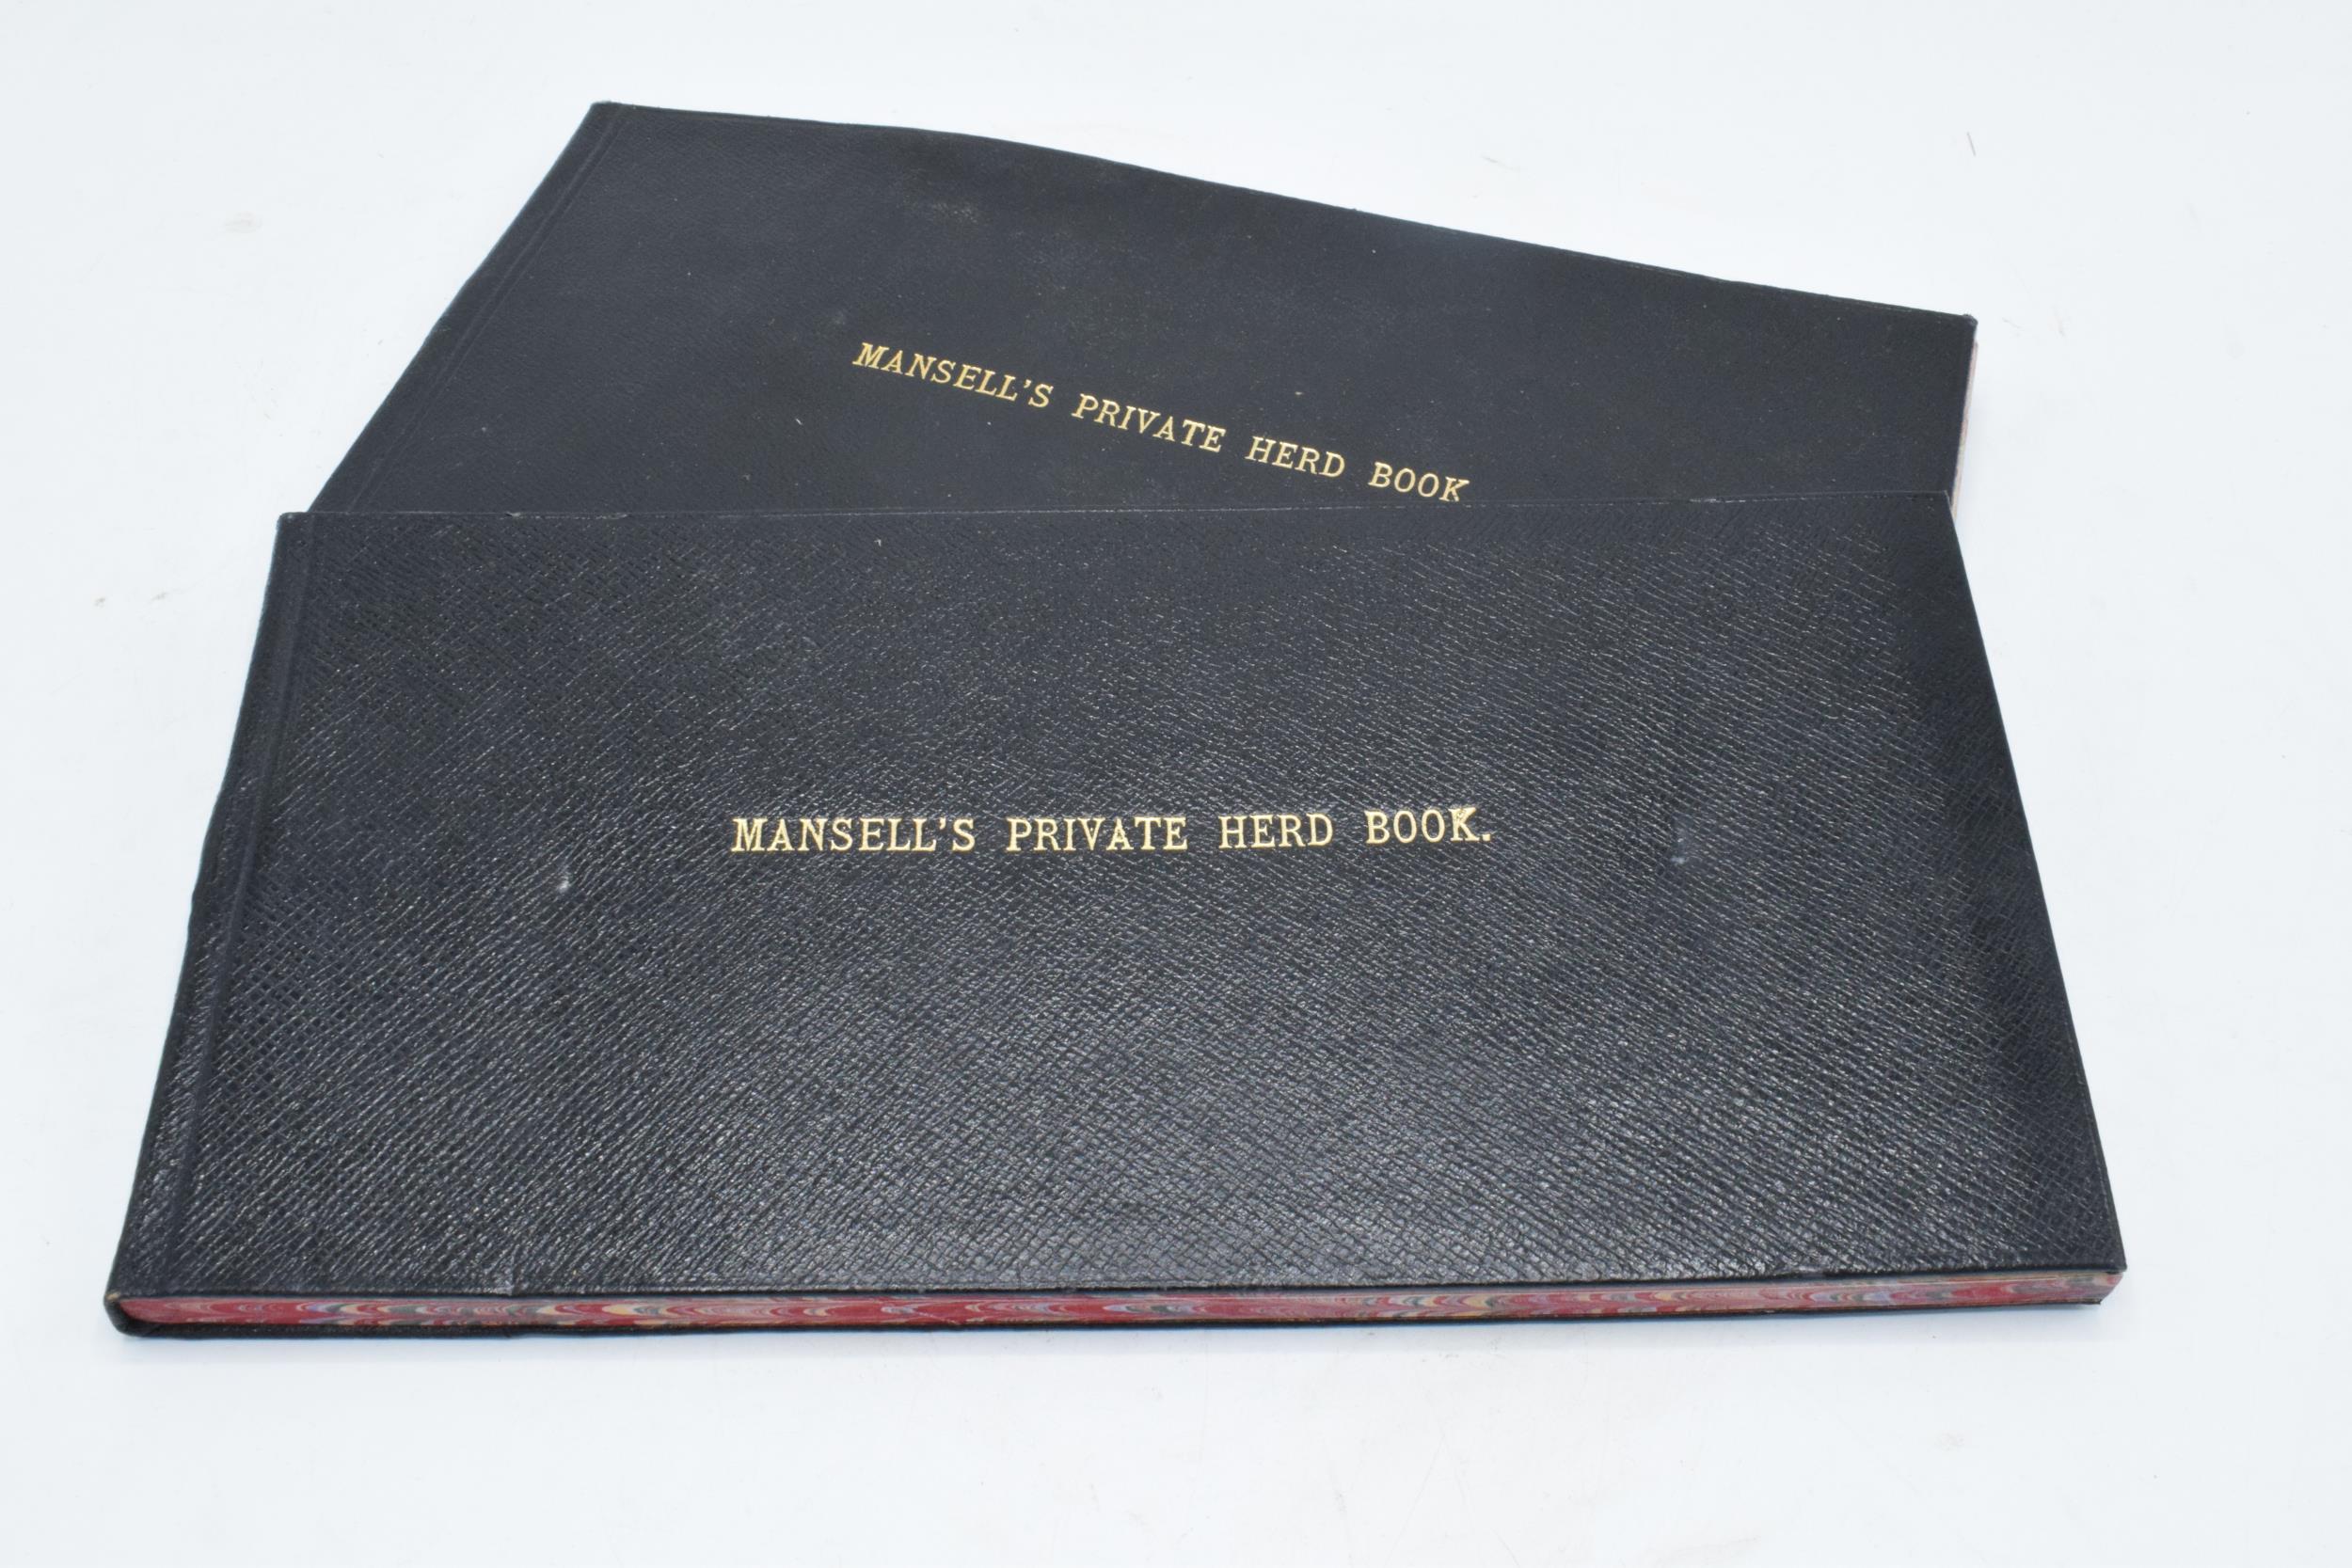 Agricultural Interest: a pair of Mansell's Private Herd Book published by Alfred Mansell and Co of